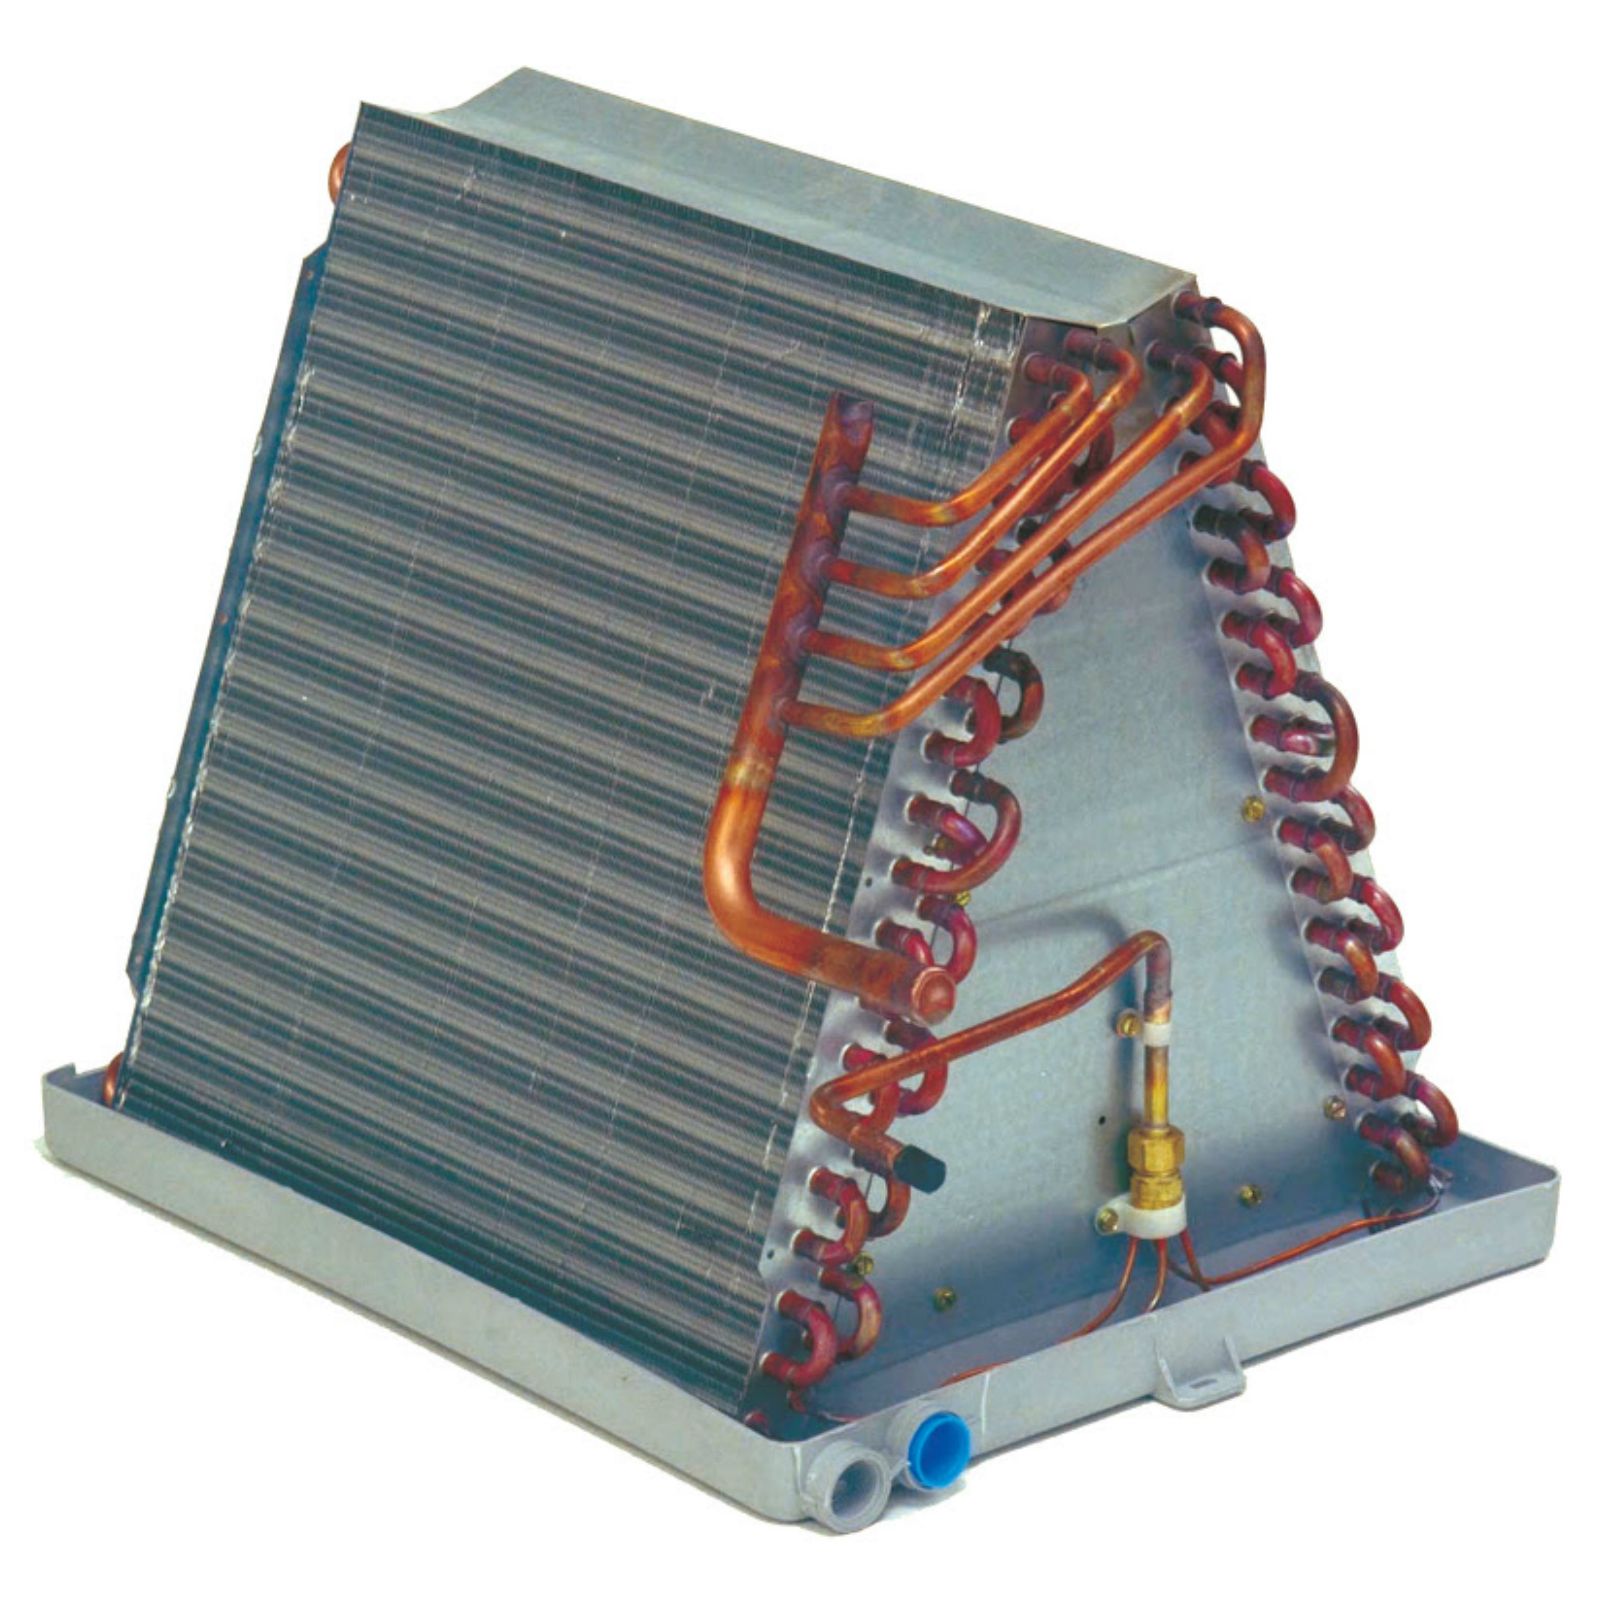 Tempstar EPA30B15WT - 2 1/2 Ton, R22, Uncased A Type Piston Replacement Evaporator Coil, 14.75" Drain Pan (for 15.5" Cabinet)